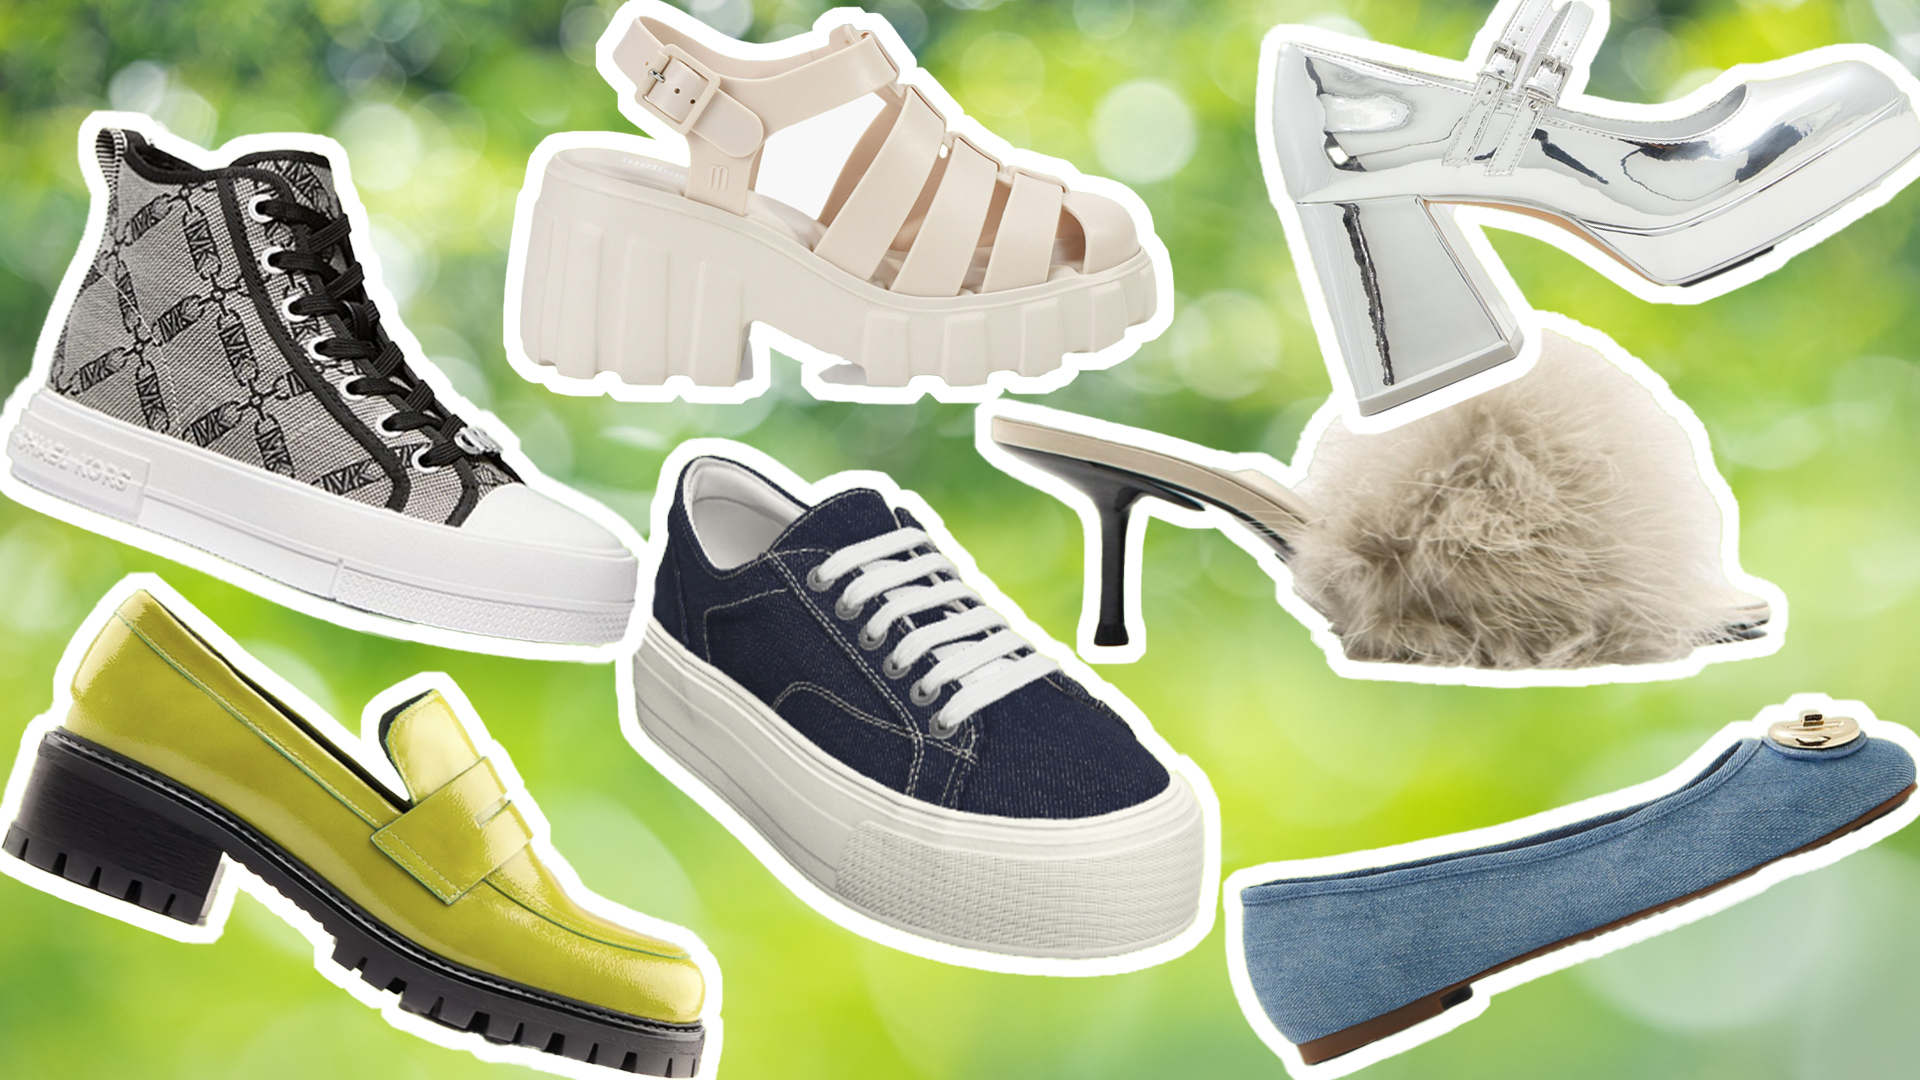 Step into style this spring with the hottest shoe trends